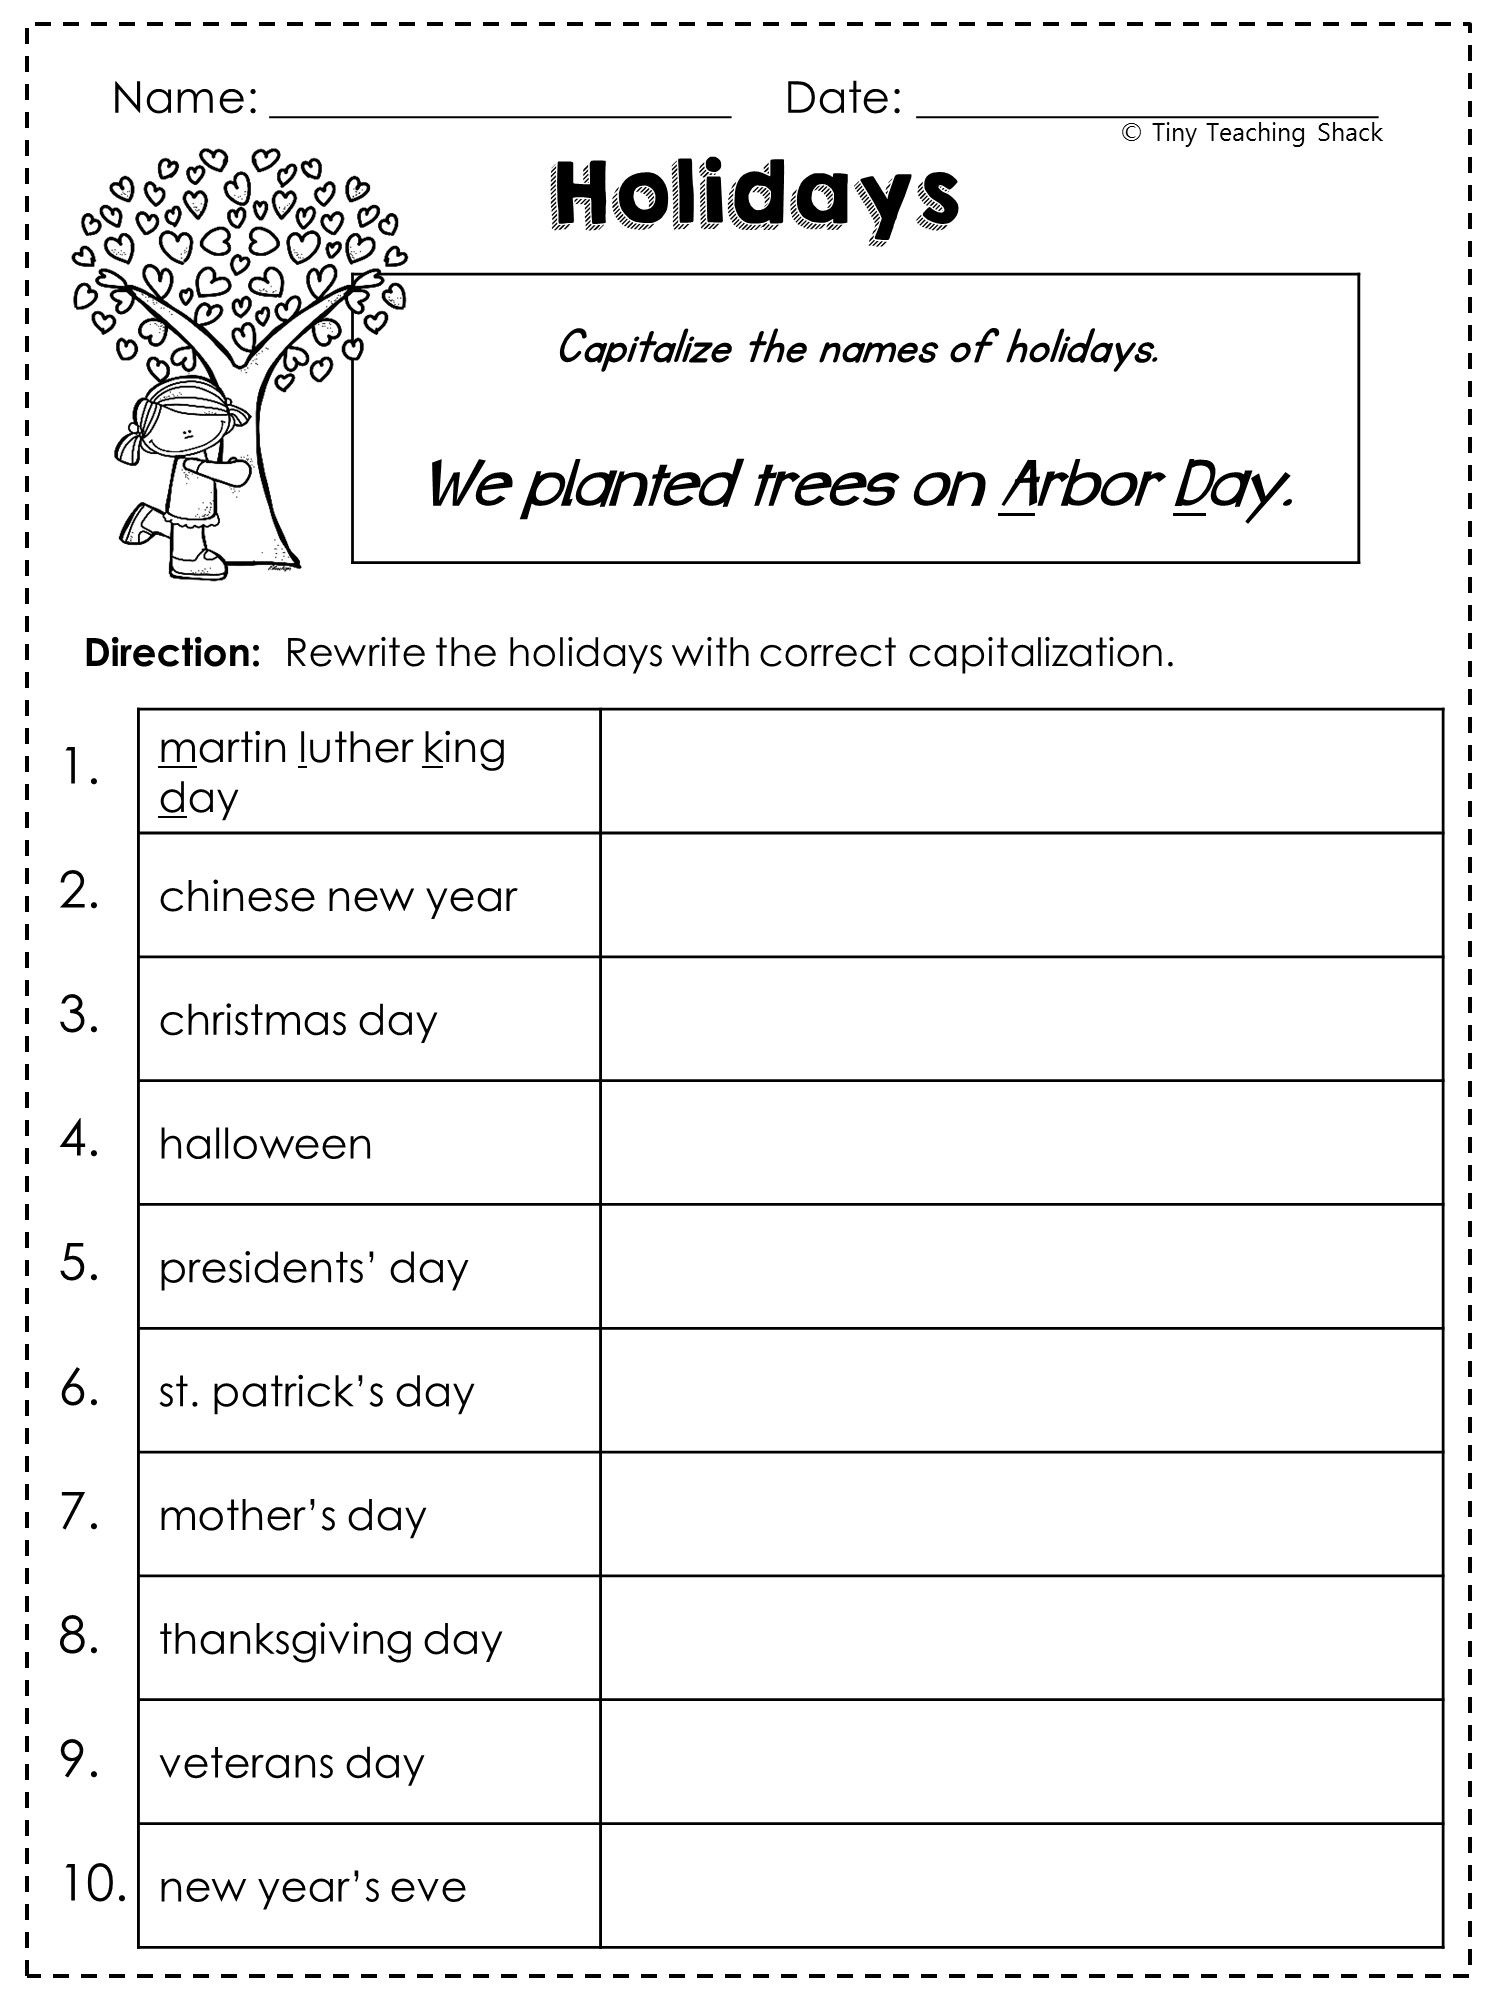 Free Printable Activity Sheets For 2nd Grade